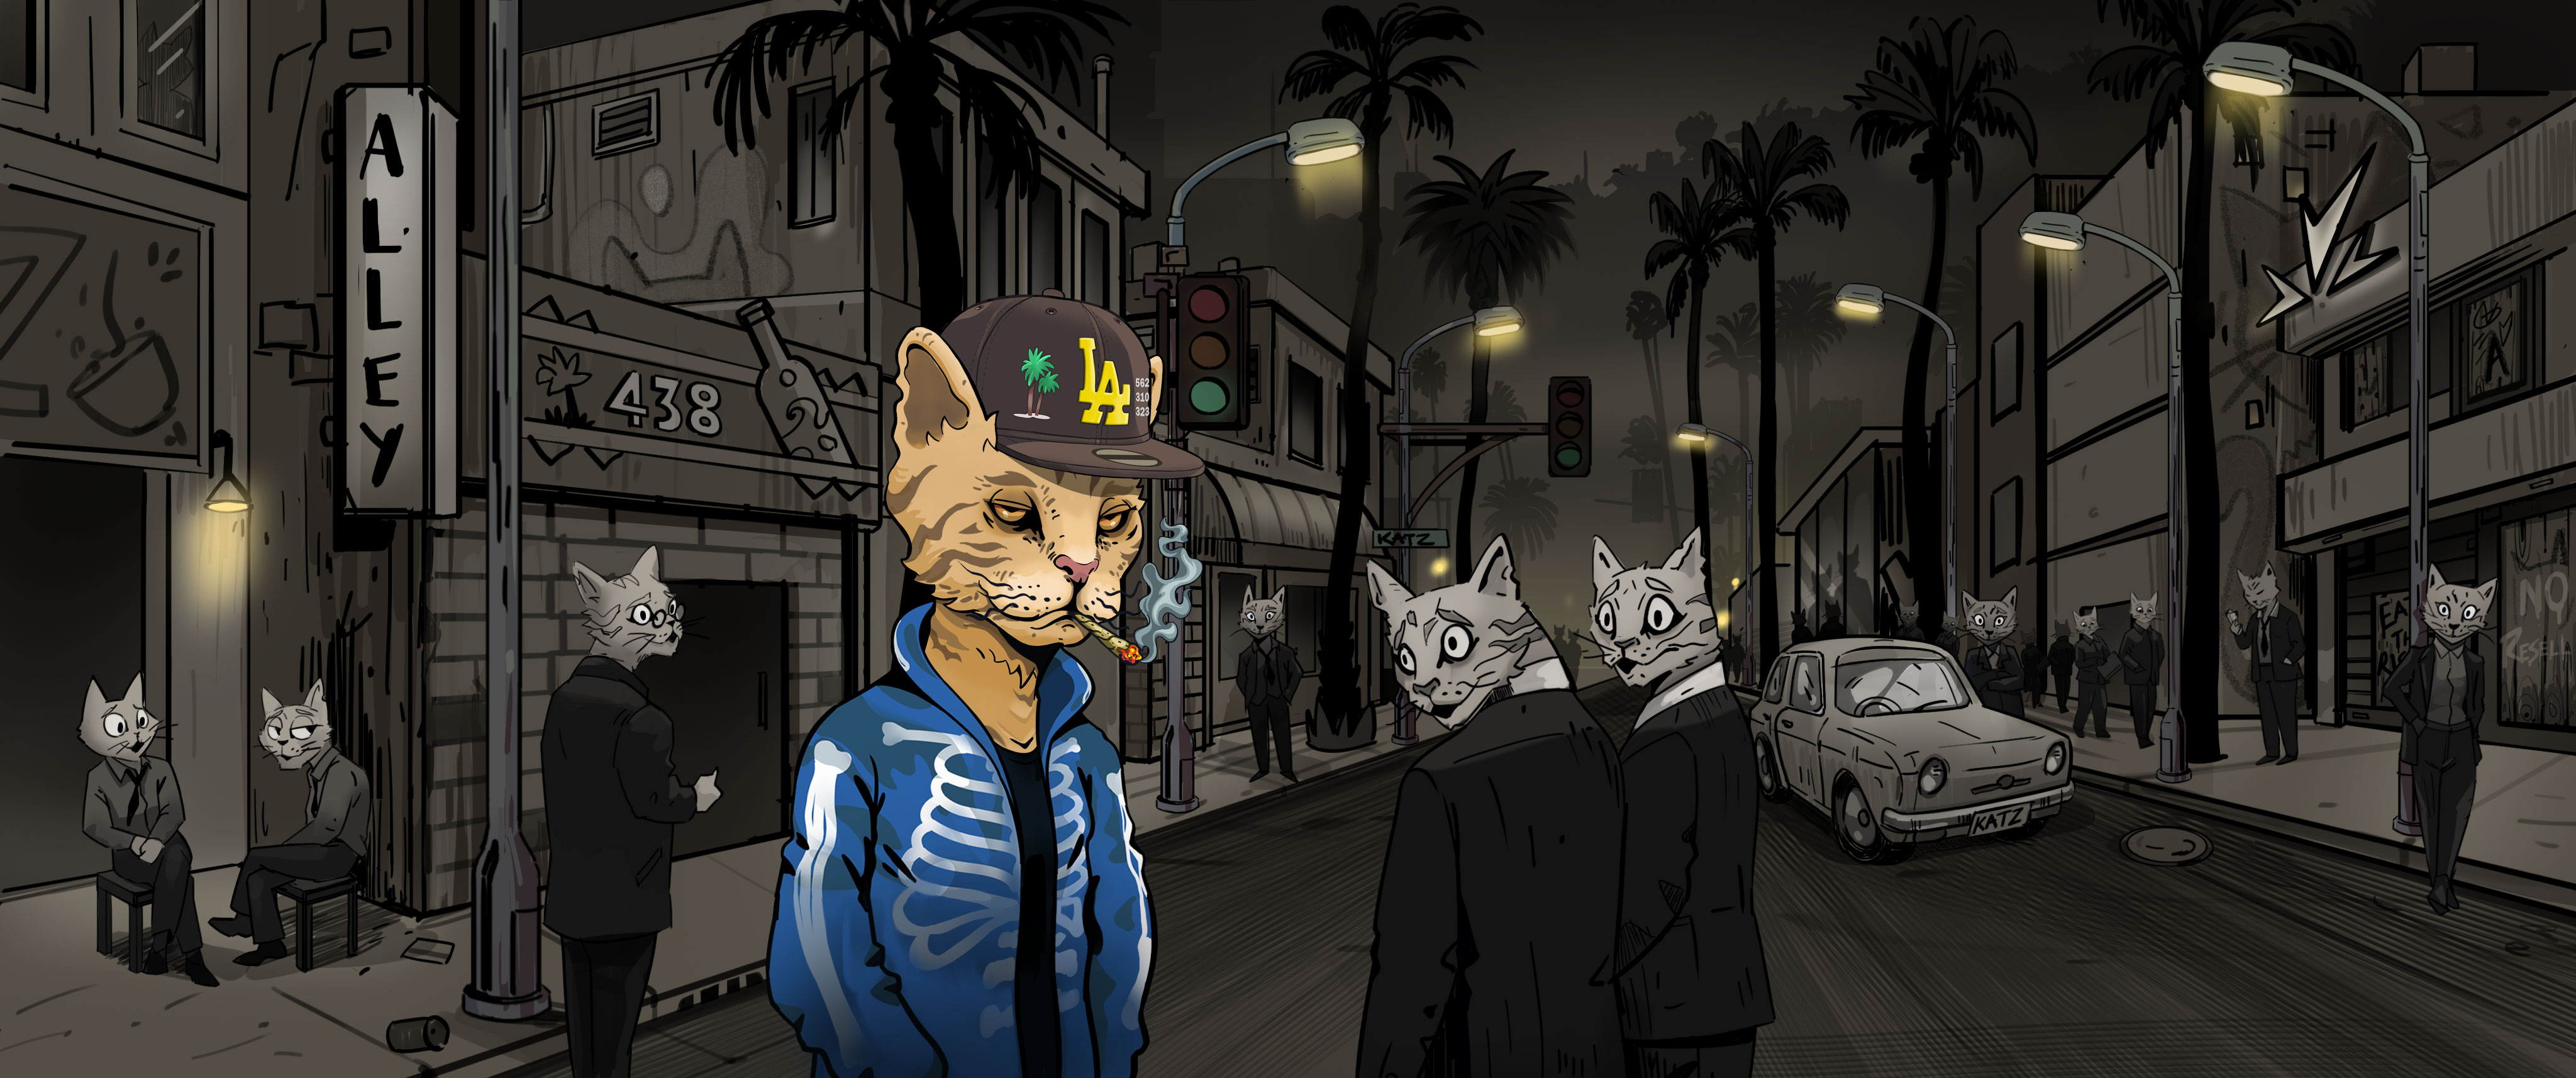 In a government controlled world of forced conformity and standards one alley kat awakens amongst the dreamers.